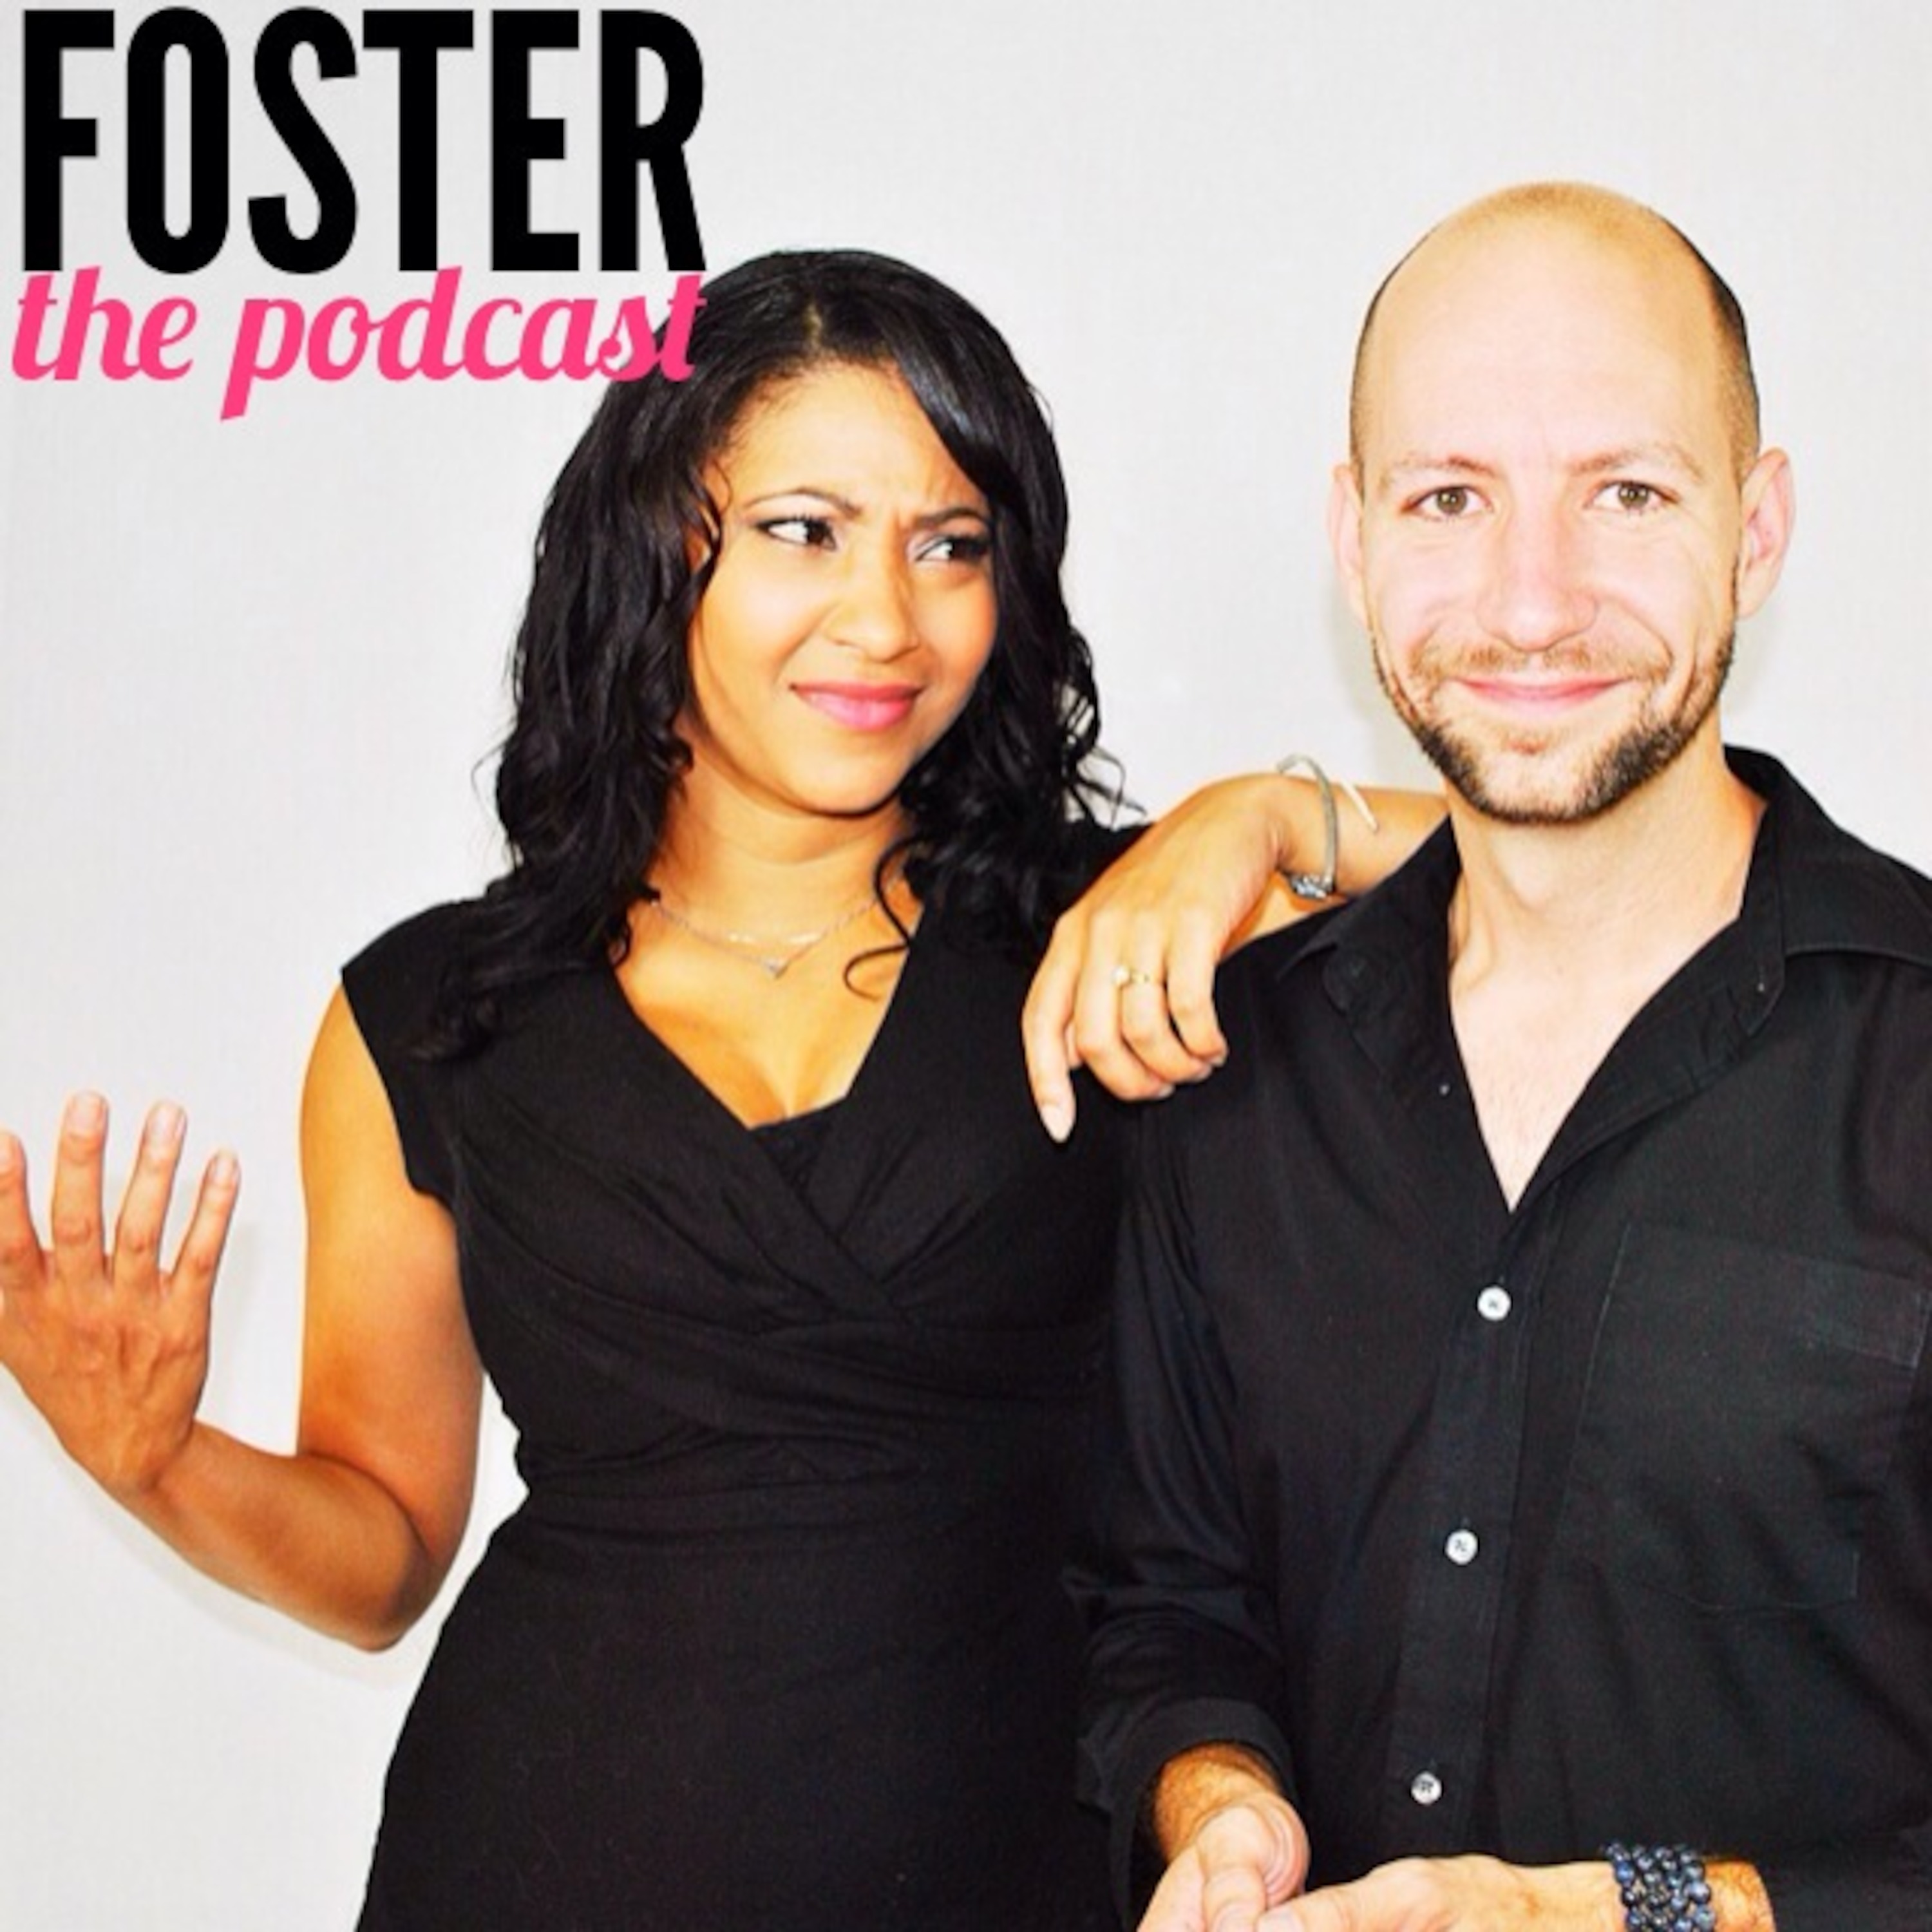 FOSTER the Podcast